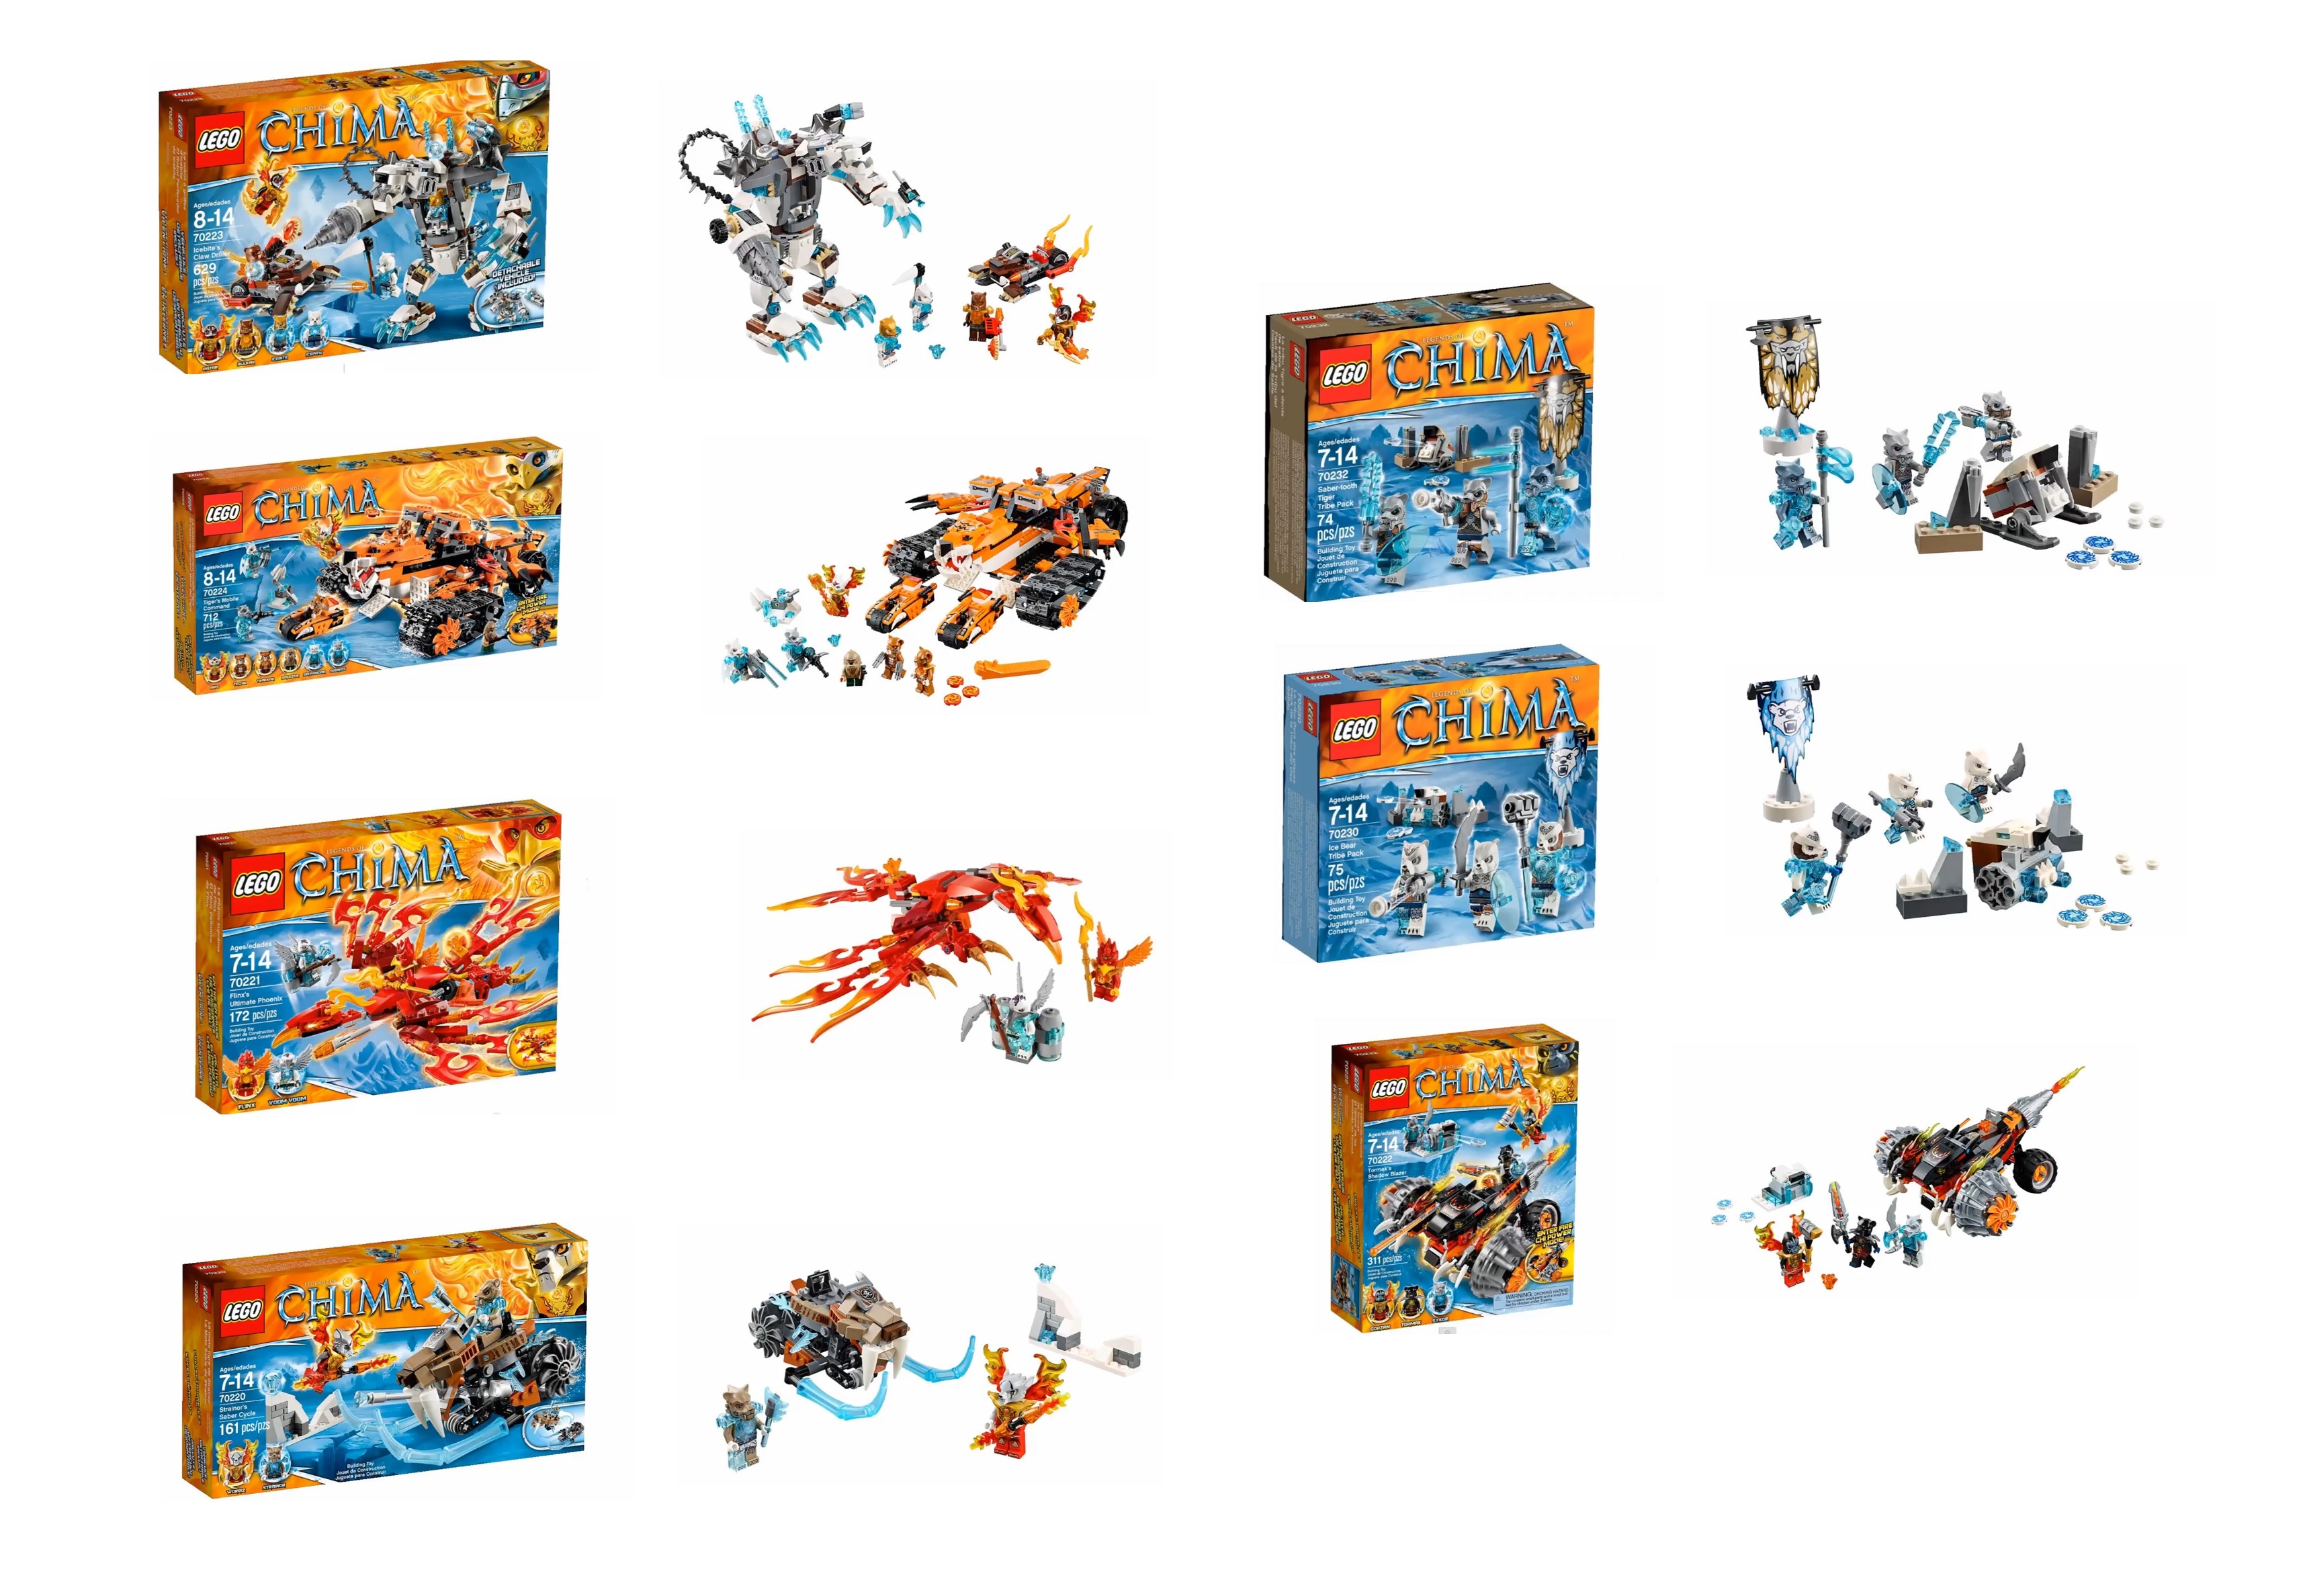 LEGO Chima Pictures 70220 70221 70223 70224 70229 70231 70232 - Toys N Bricks